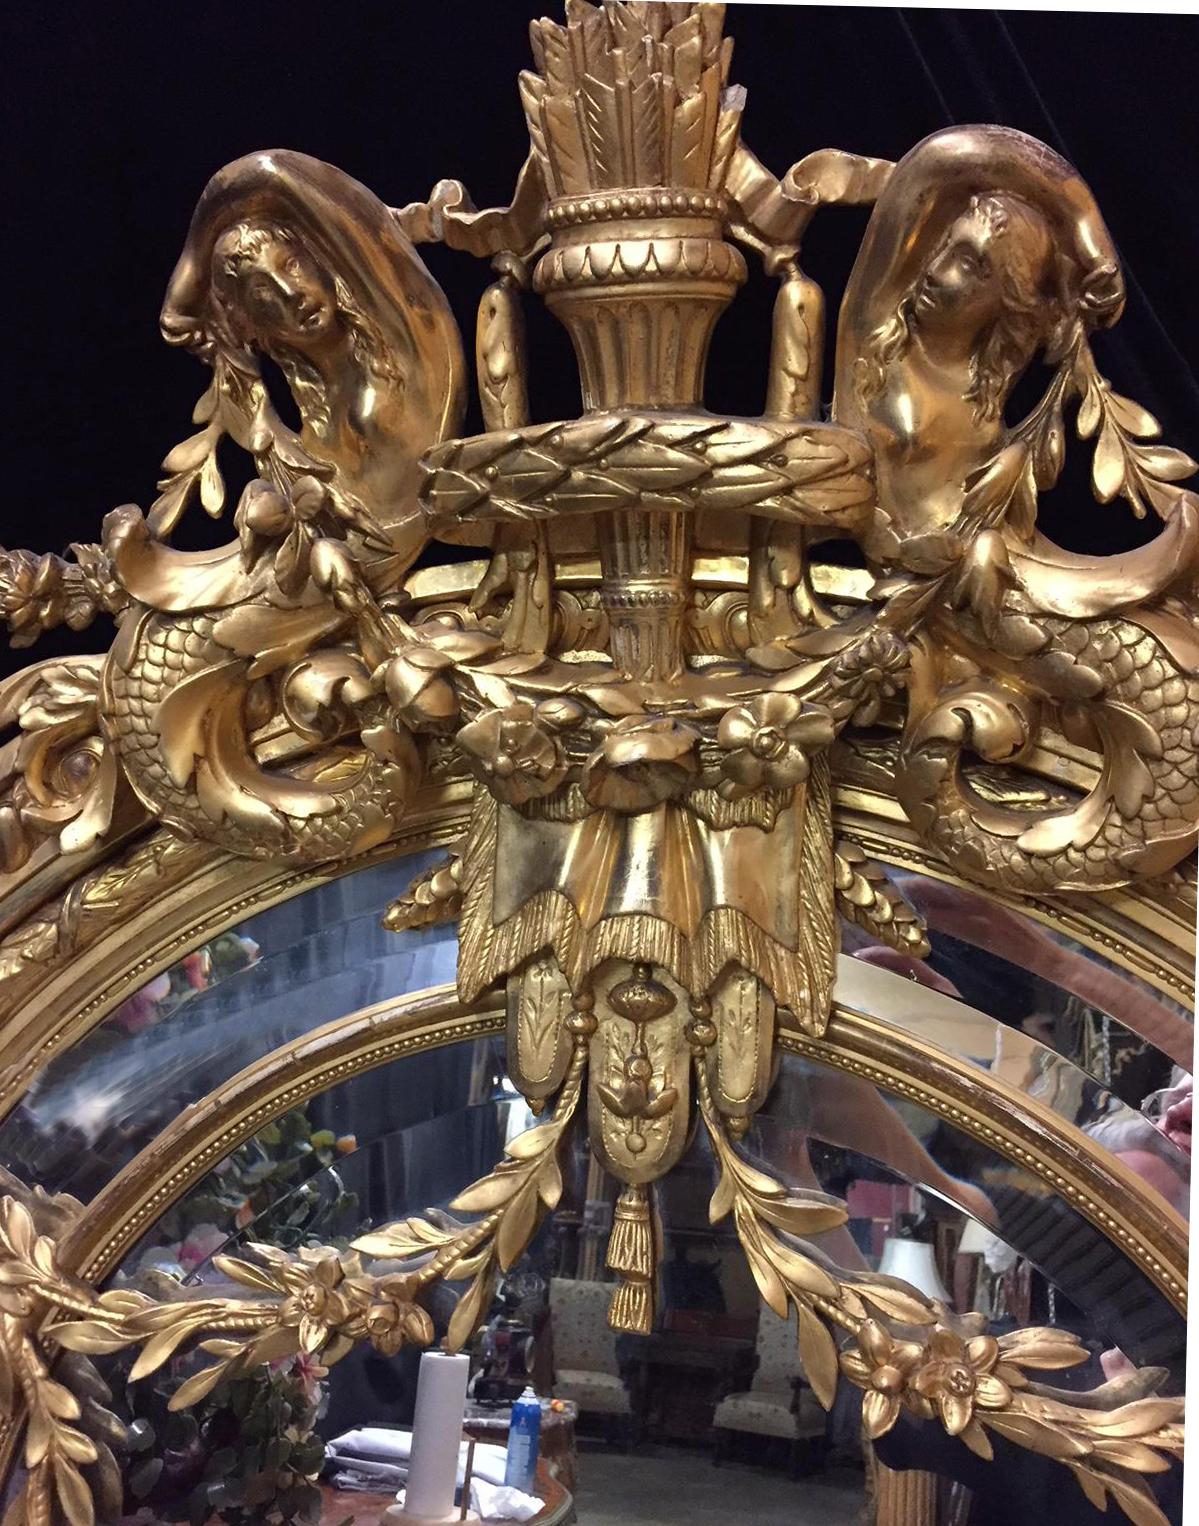 Spectacular 19th century French Louis XVI style carved giltwood and gesso figural mirror. 

The beautiful mirror is surmounted by a gilt quiver containing a multitude of arrows flanked by two finely carved mermaids over drapery and tassels. The